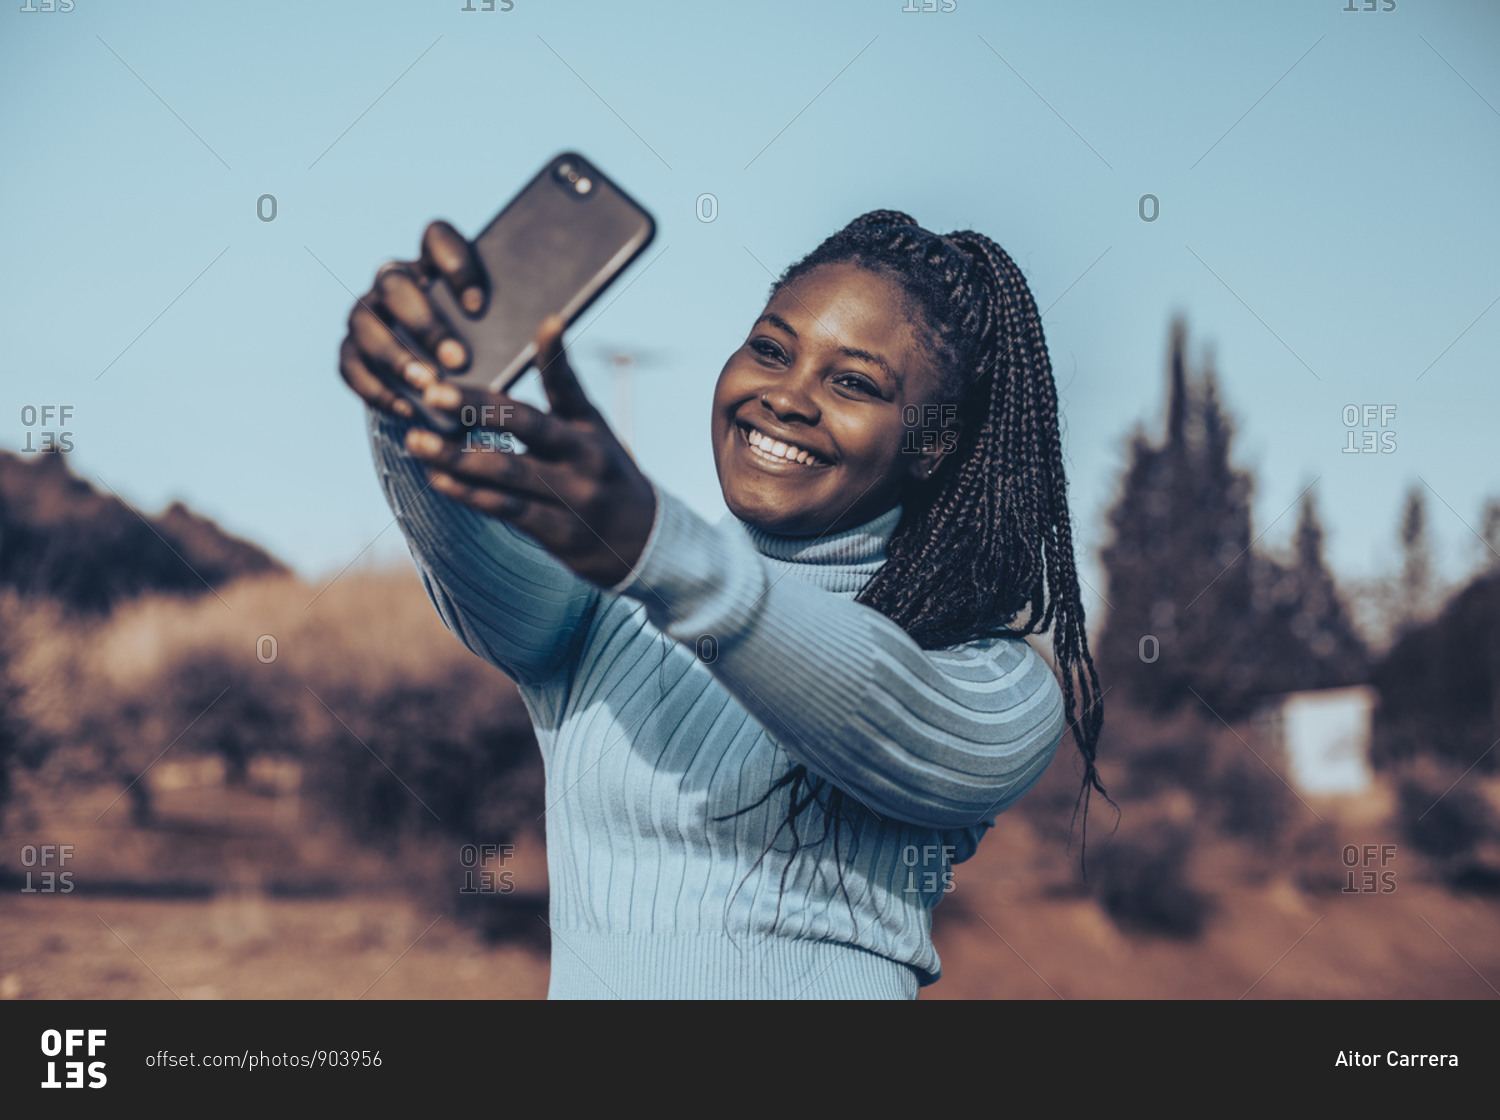 Smiling young woman with braids taking selfies in a rural setting